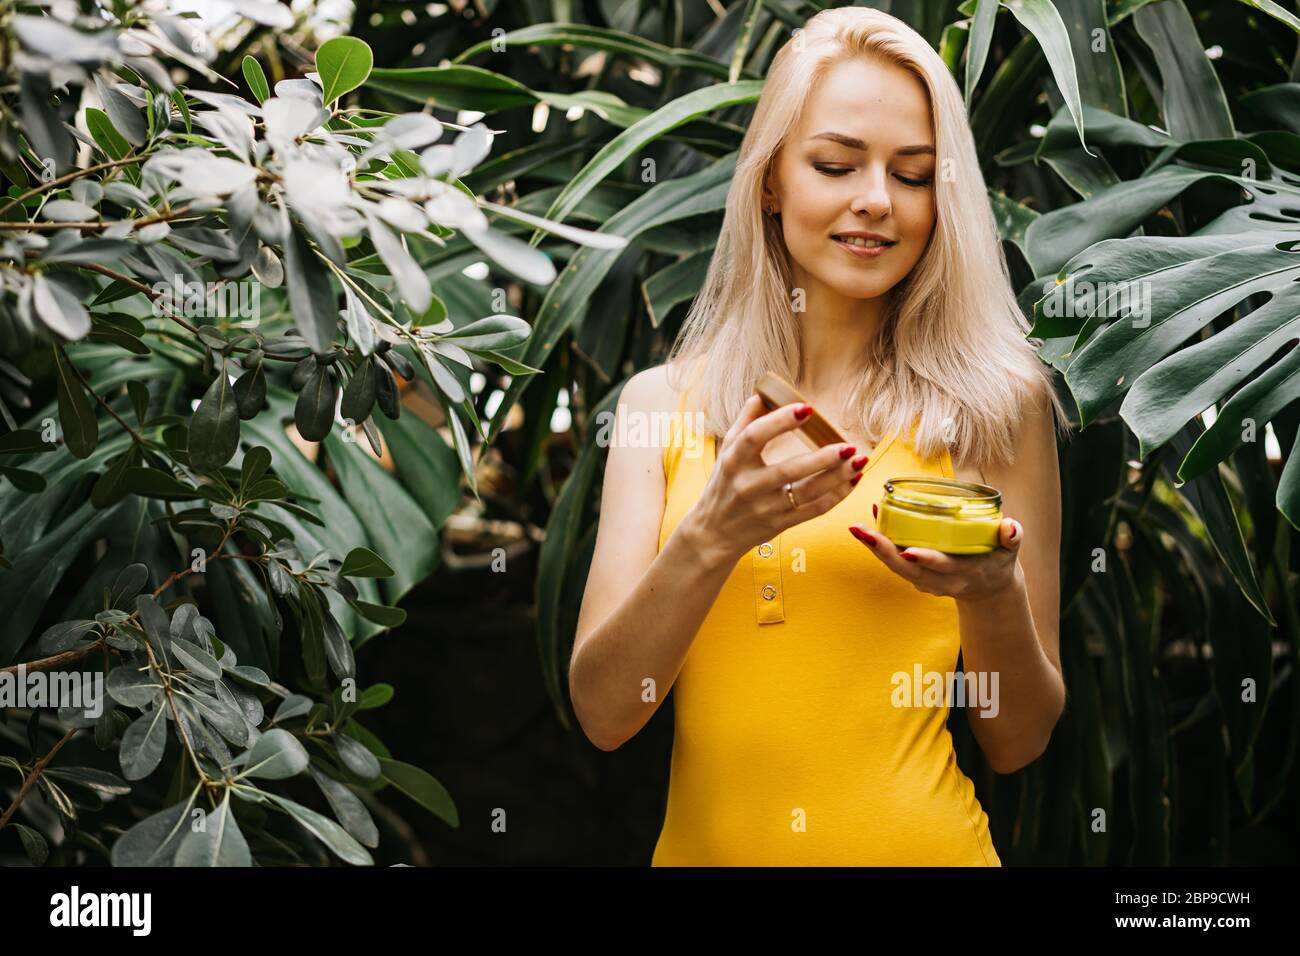 Beautiful caucasian woman with healthy smooth clean skin holding jar of body cream, sunblock, smelling its scent with closed eyes, posing in rainfores Stock Photo